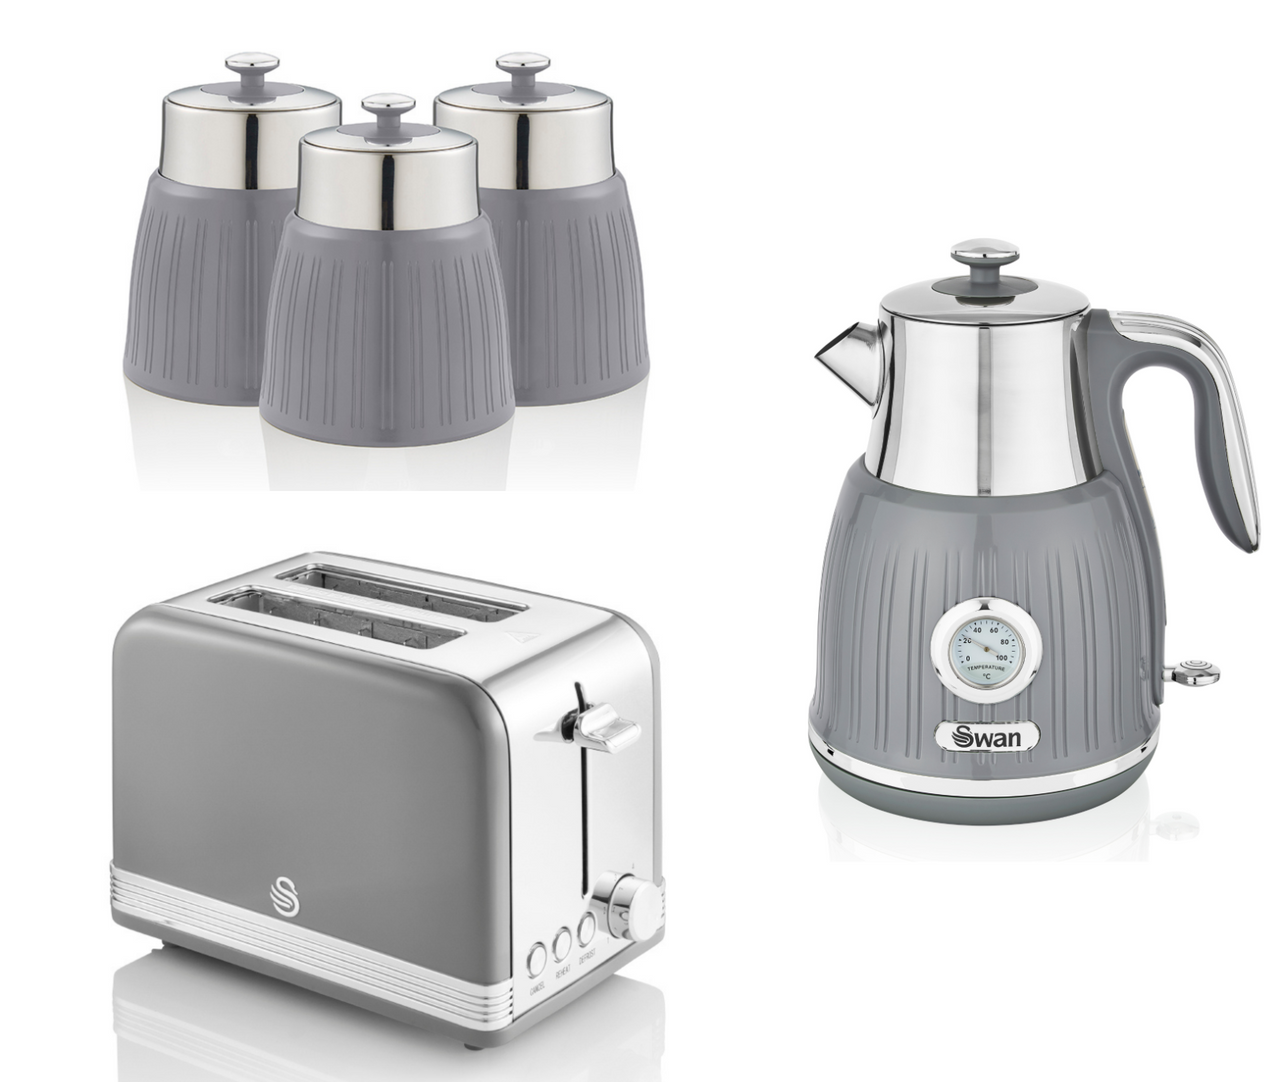 SWAN Retro Grey Jug Dial Kettle 2 Slice Toaster & Canisters Matching Kitchen Set